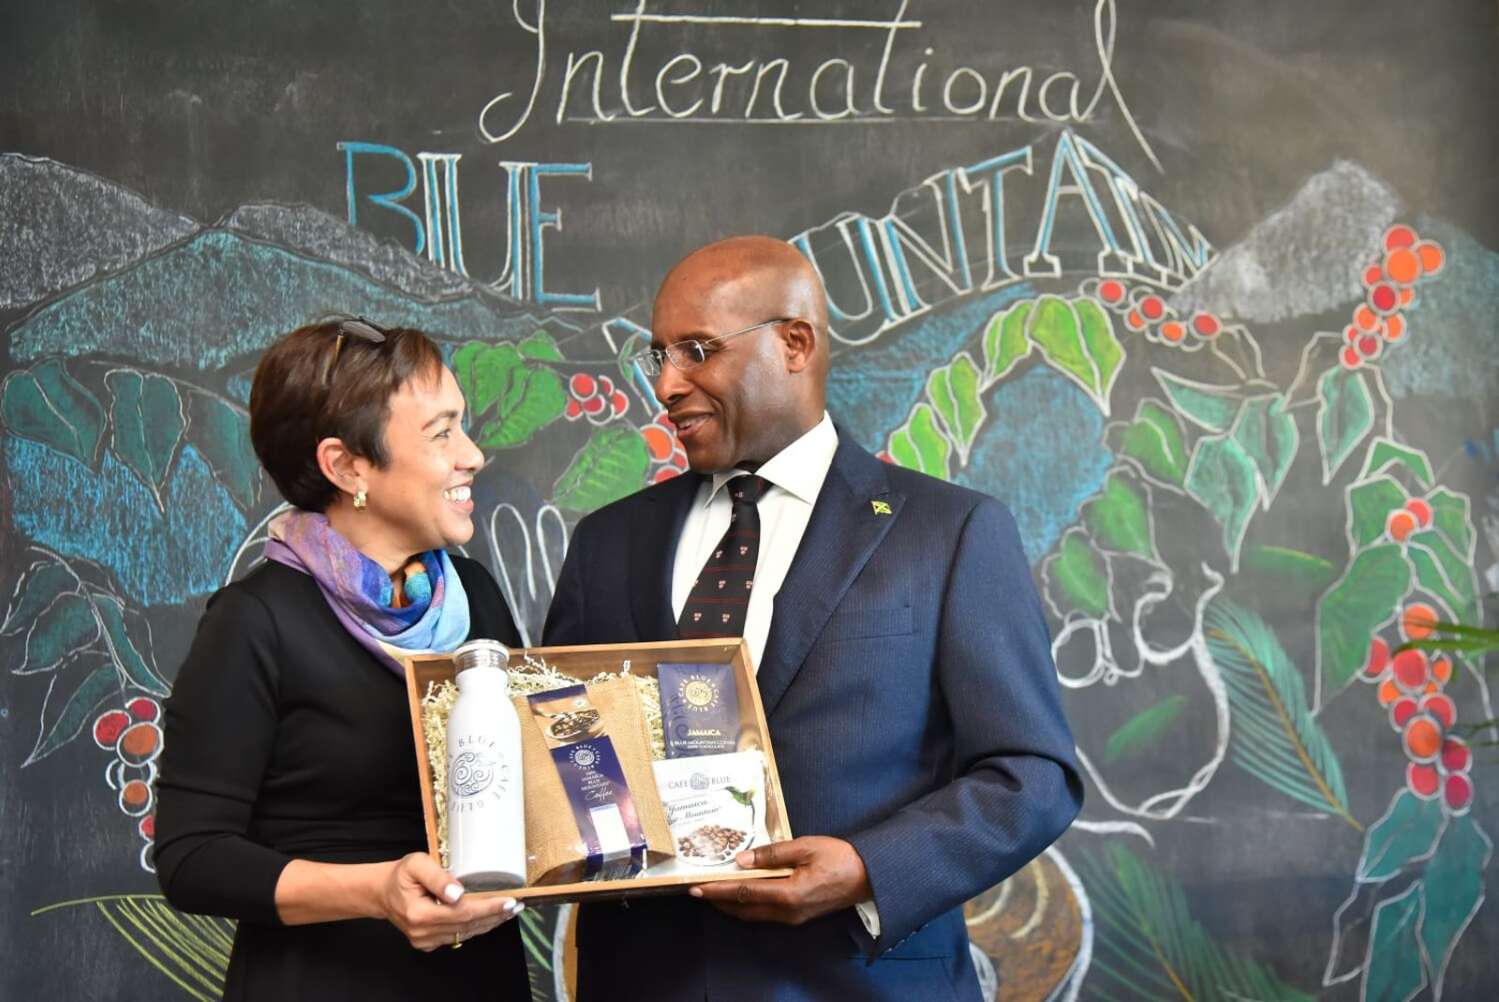 For the past five years, Jampro has partnered with the Jamaica Coffee Exporters’ Association (JCEA) and the Jamaica Agricultural Commodities Regulatory Authority (JACRA) to heighten awareness of this iconic, luxury brew among indigenous coffee drinkers as well as attract a new generation captivated by a ‘luxury lifestyle’.